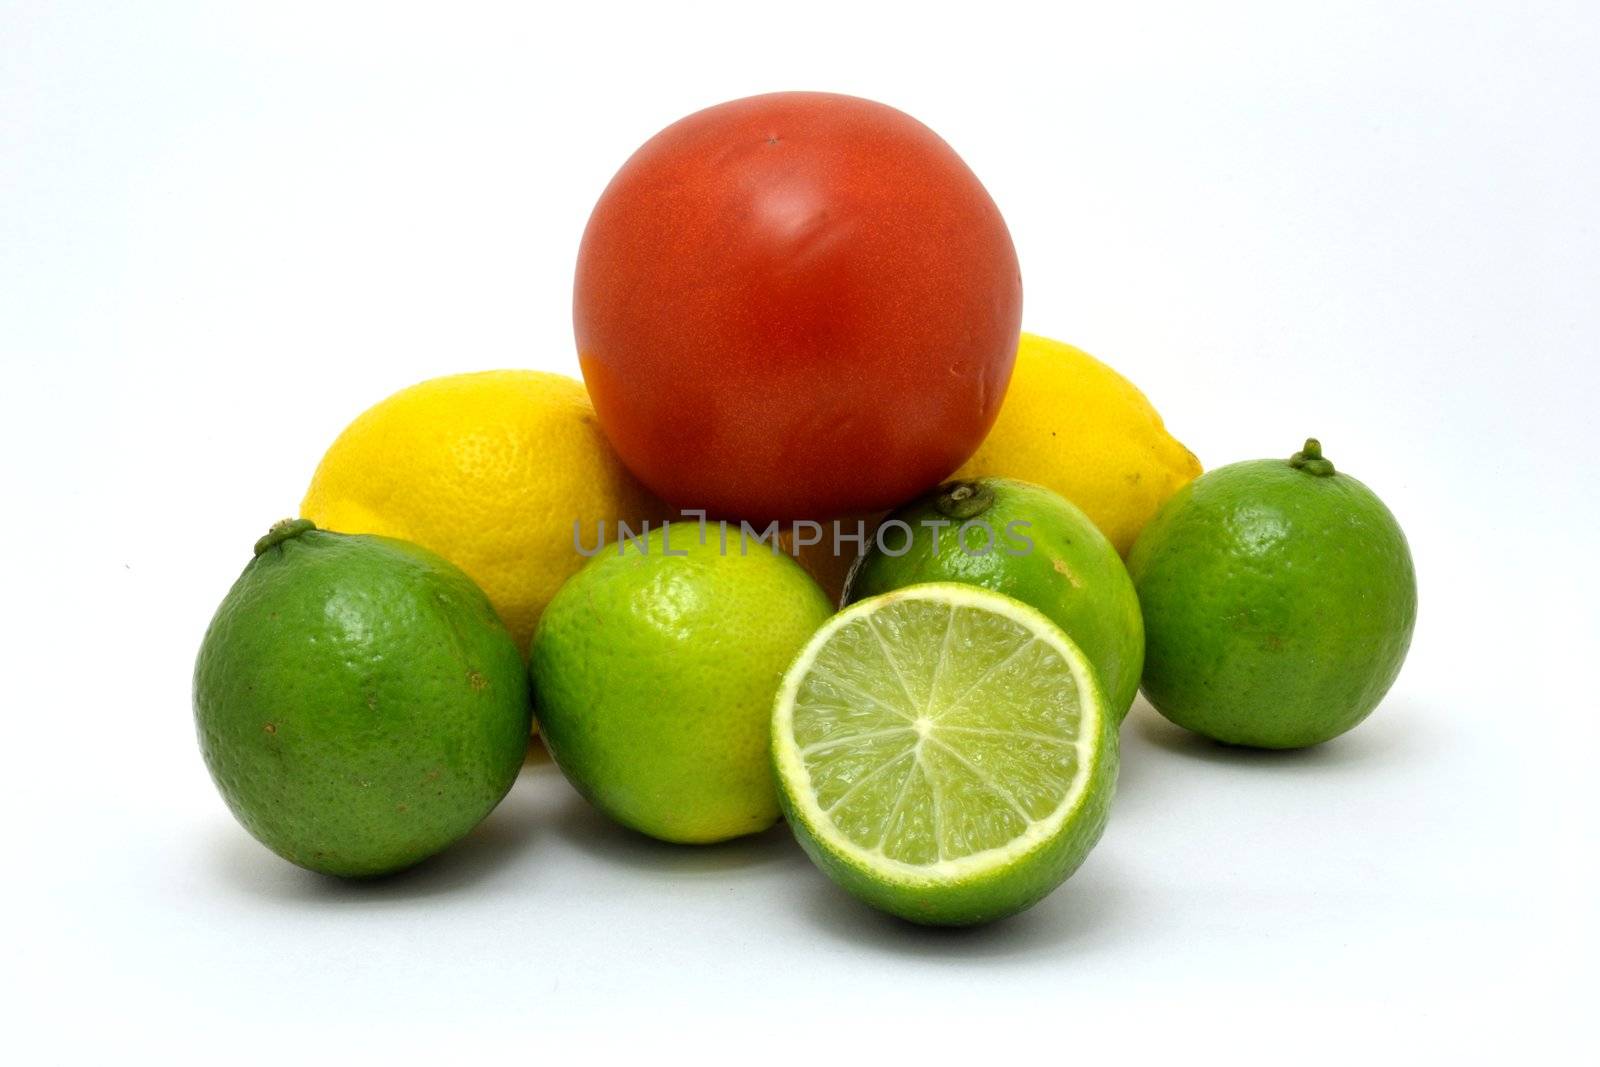 The fresh fruits over the white background